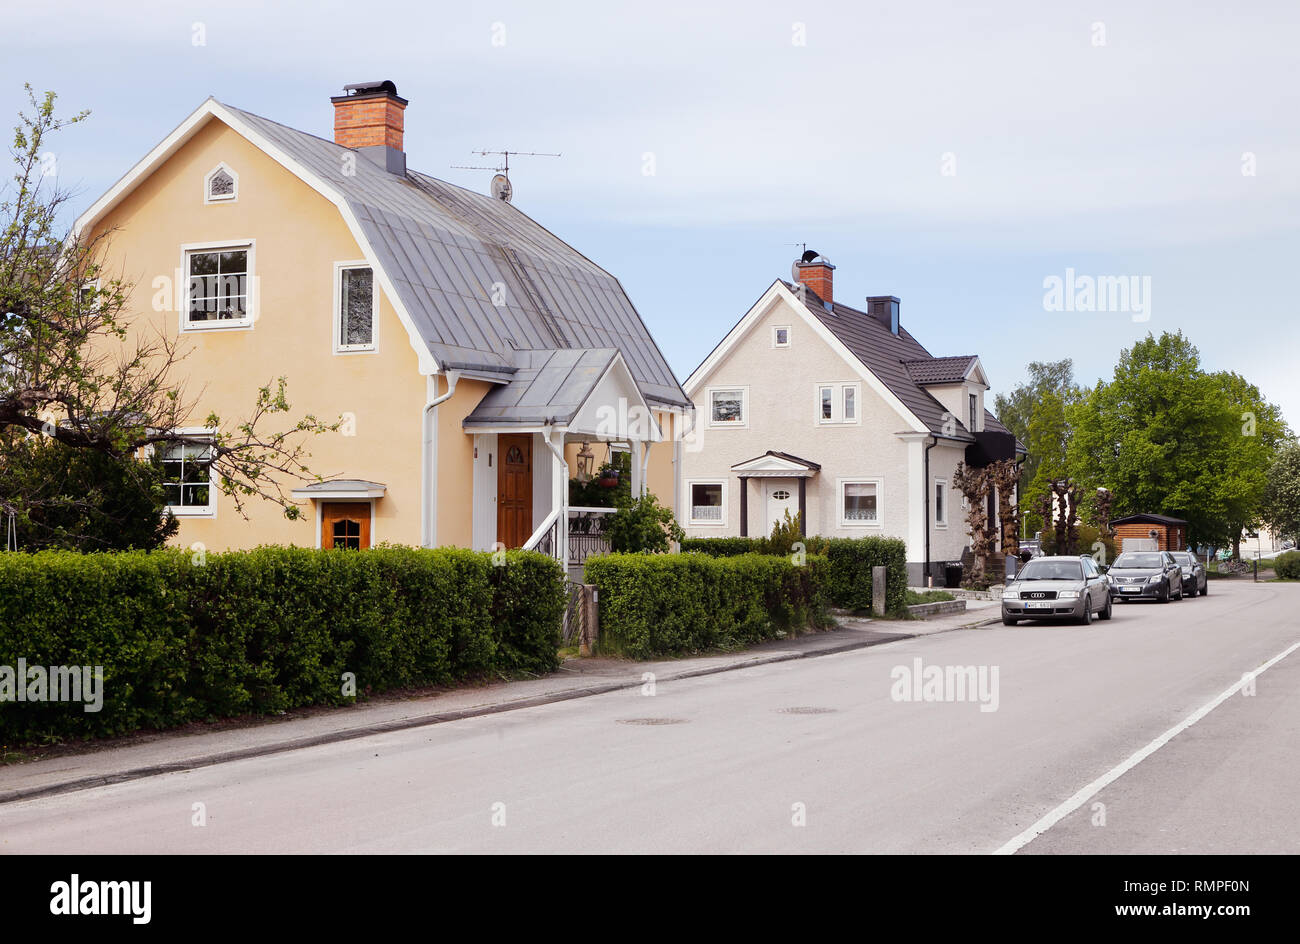 Kil, Sweden - May 26, 2016: Single family houses constructed 1920. Stock Photo